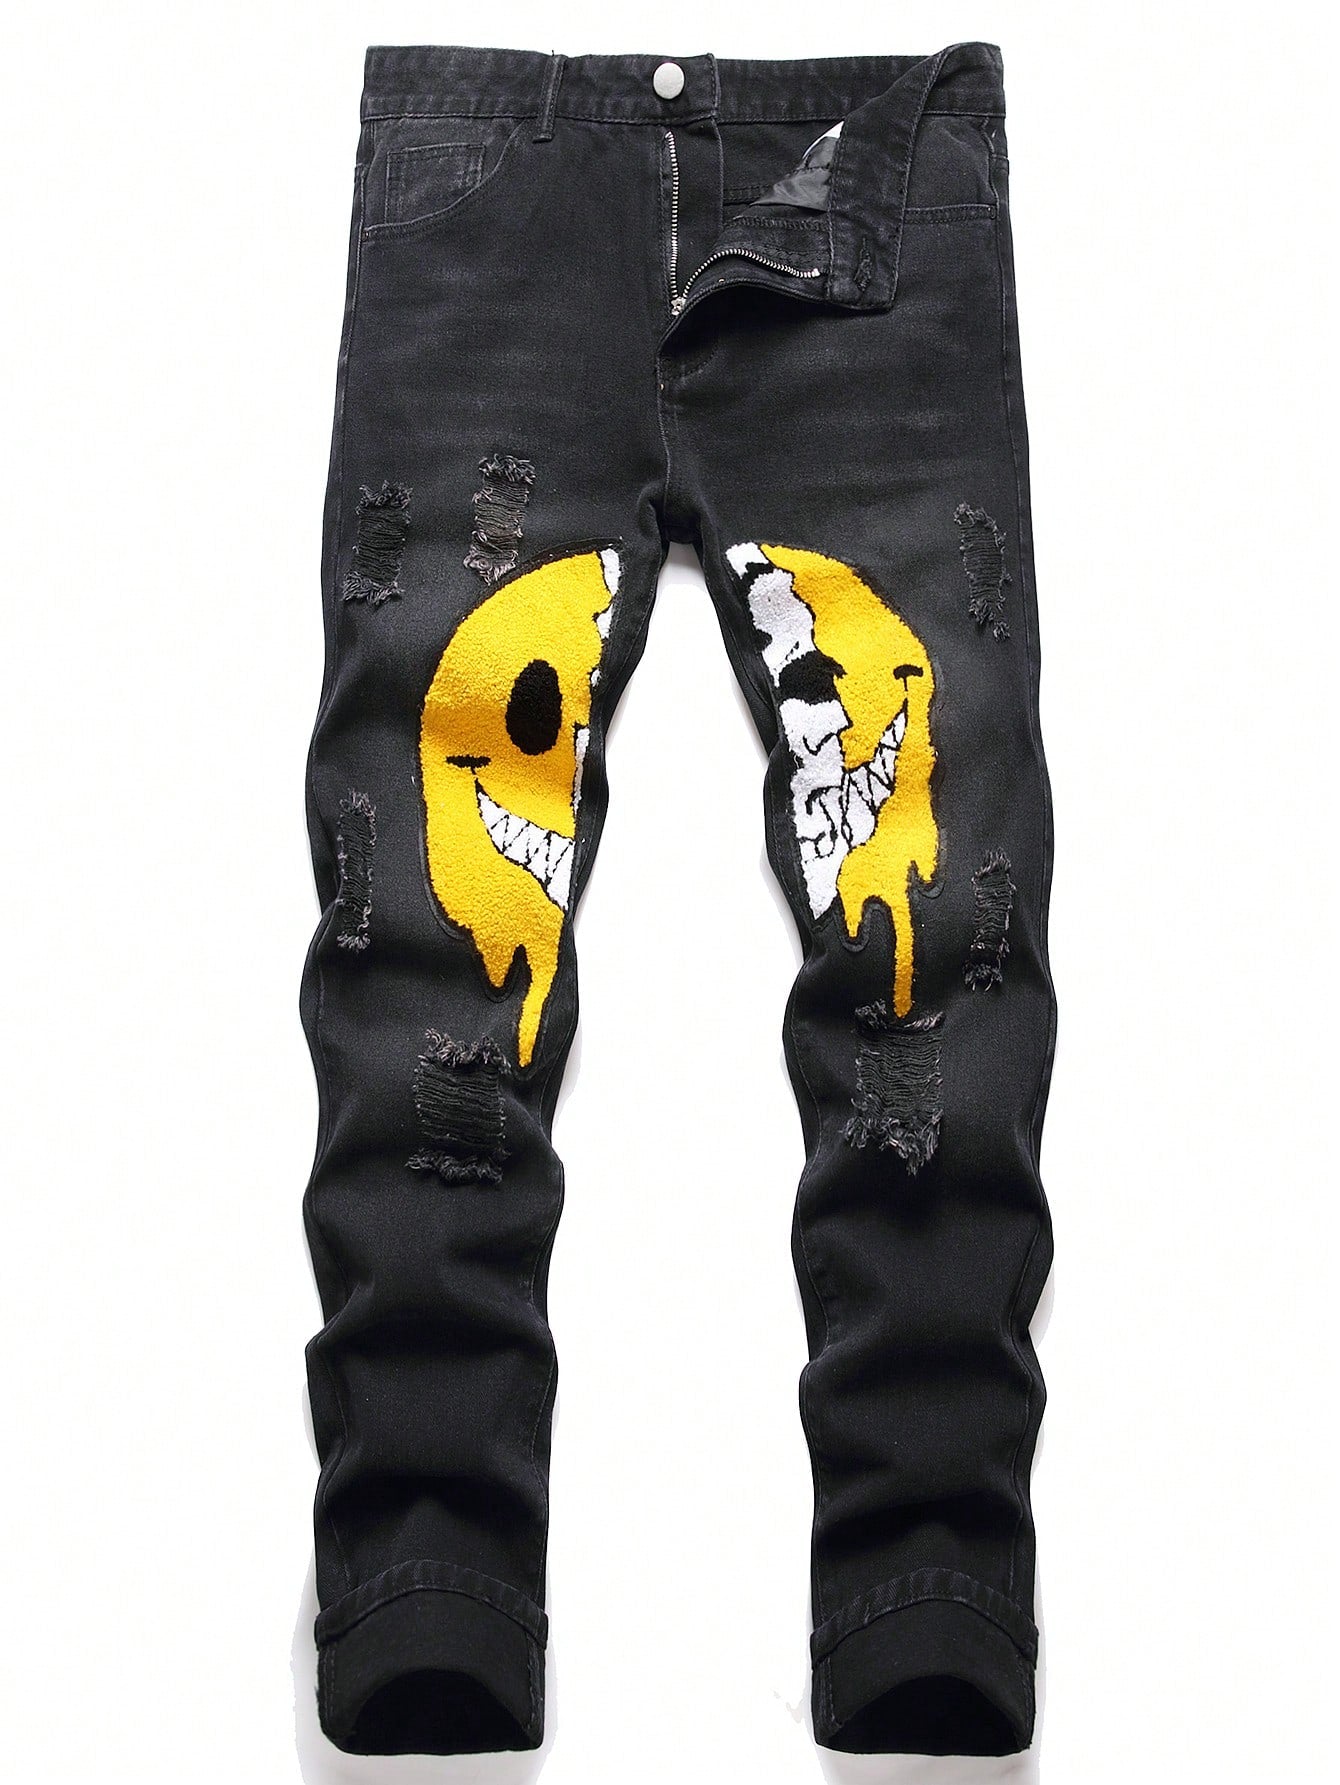 Men's Cotton Melting Smiley Cartoon Graphic Ripped Jeans 🔥